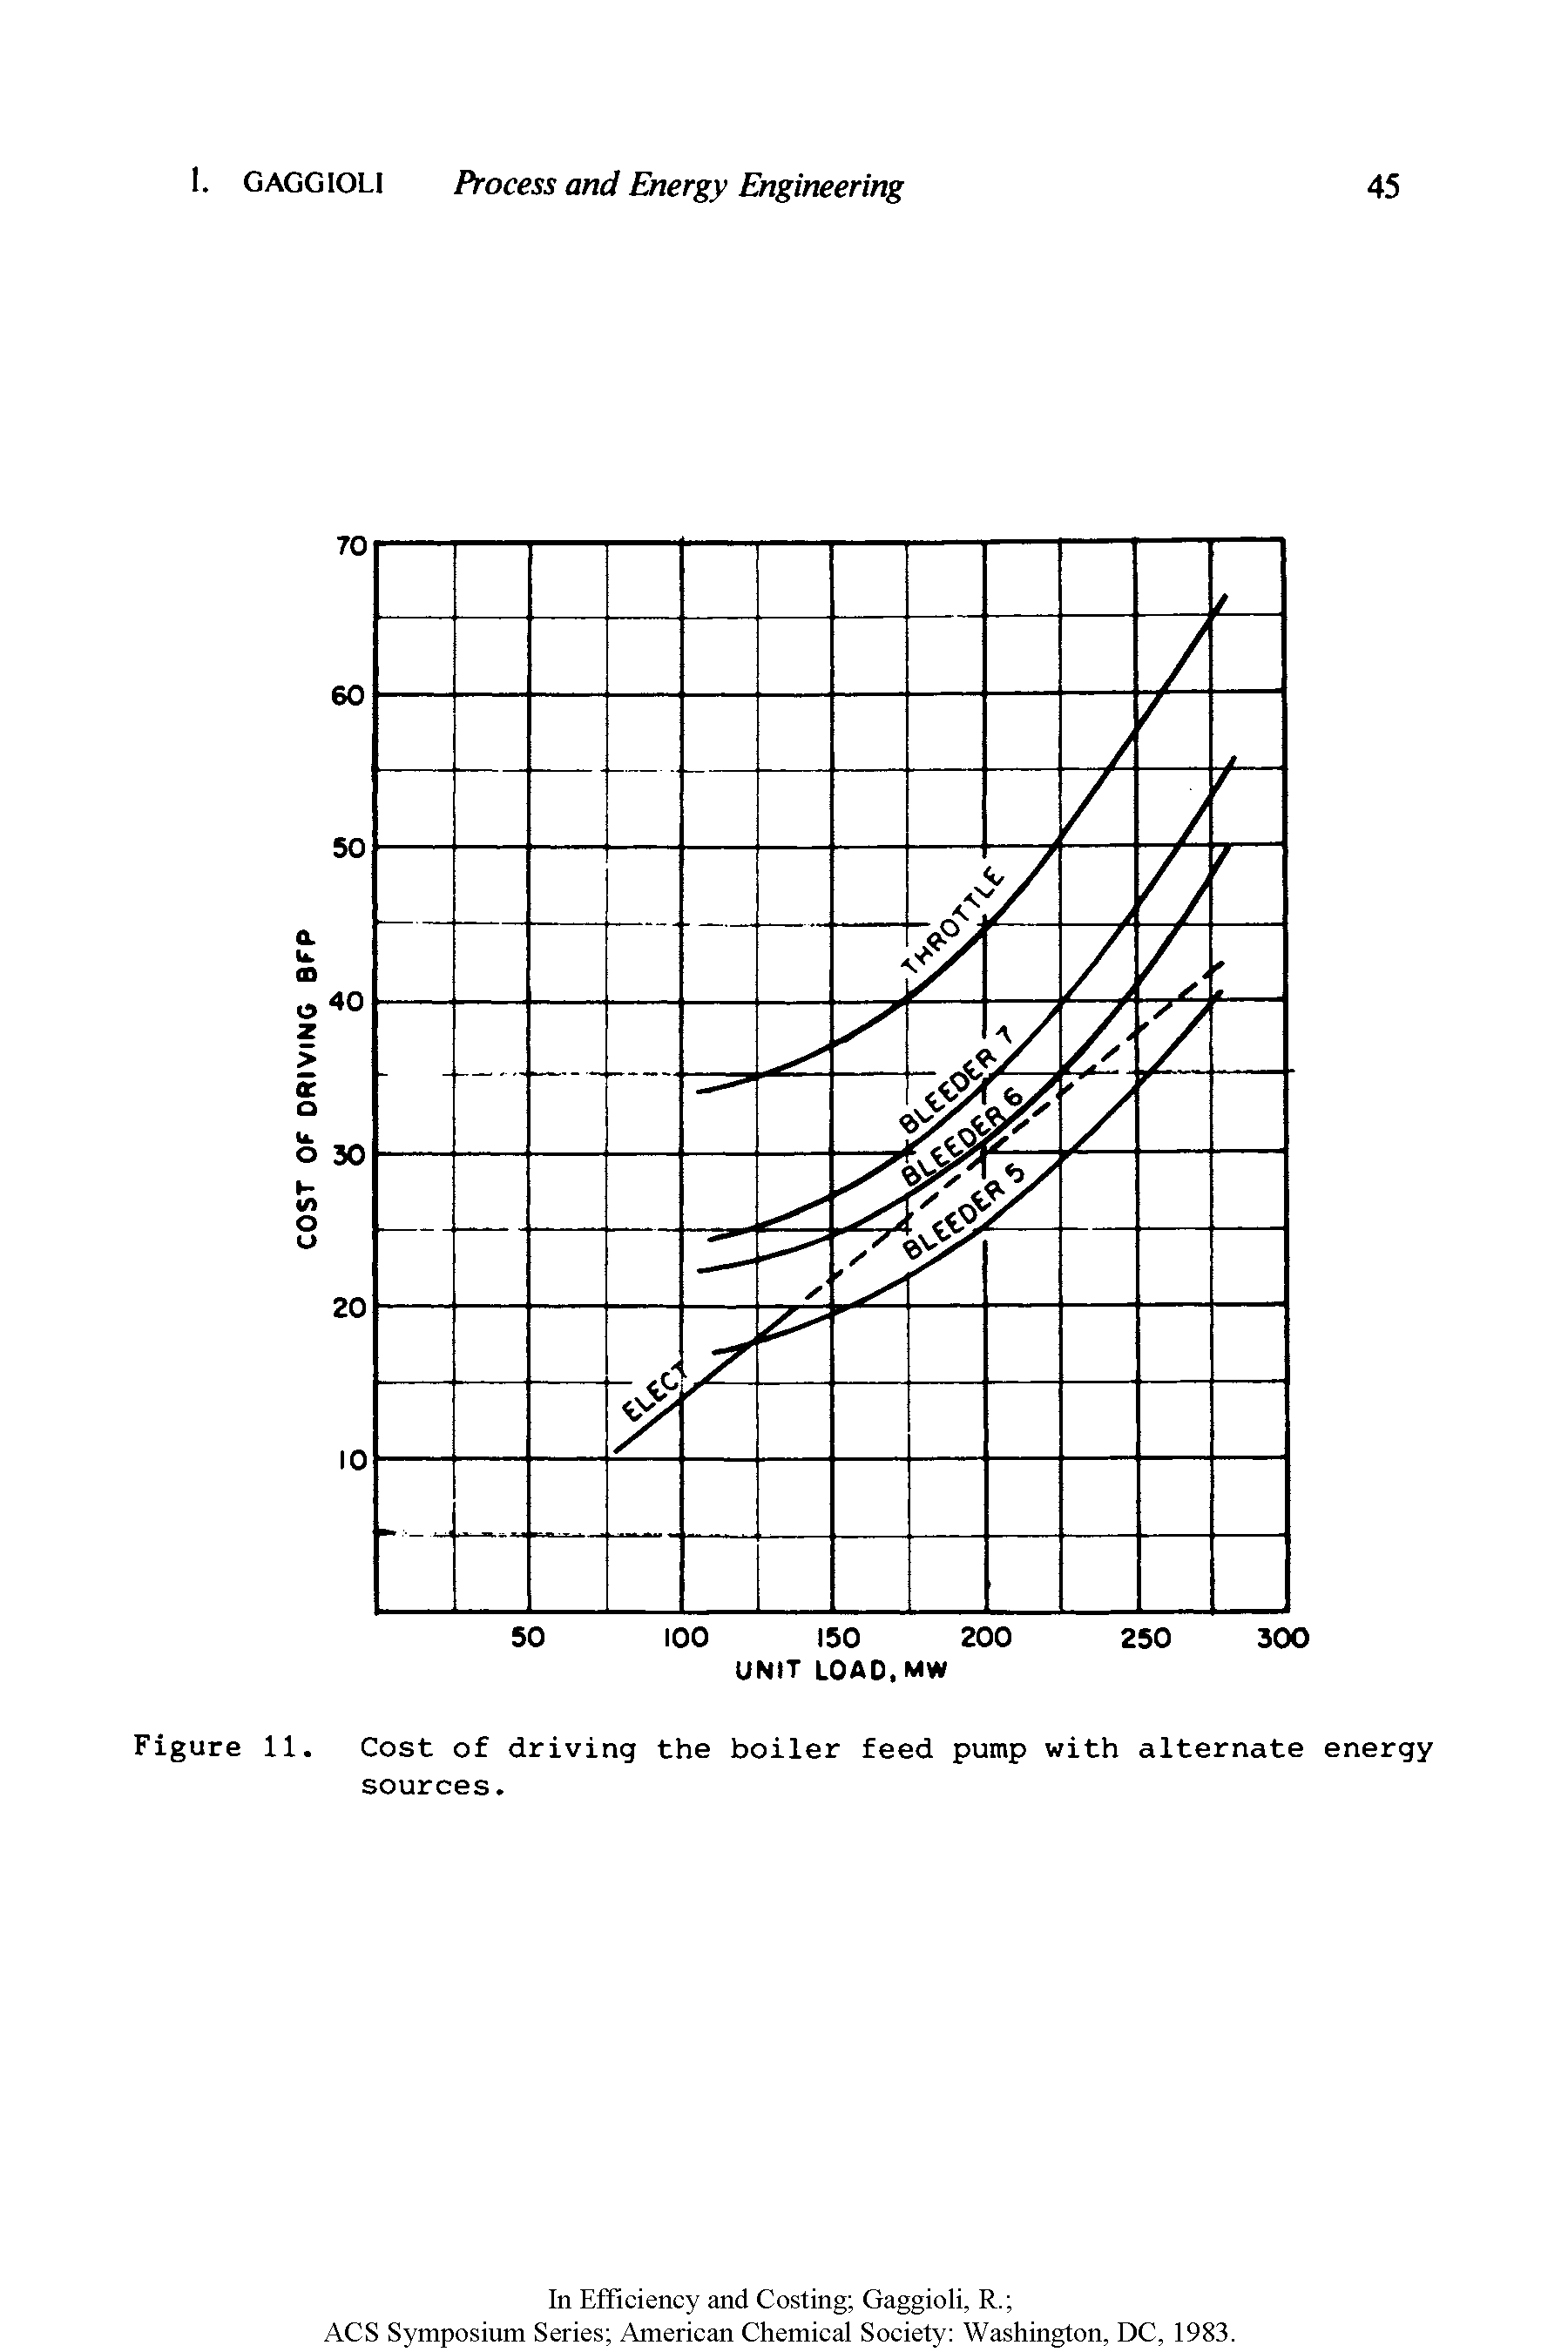 Figure 11. Cost of driving the boiler feed pump with alternate energy sources.